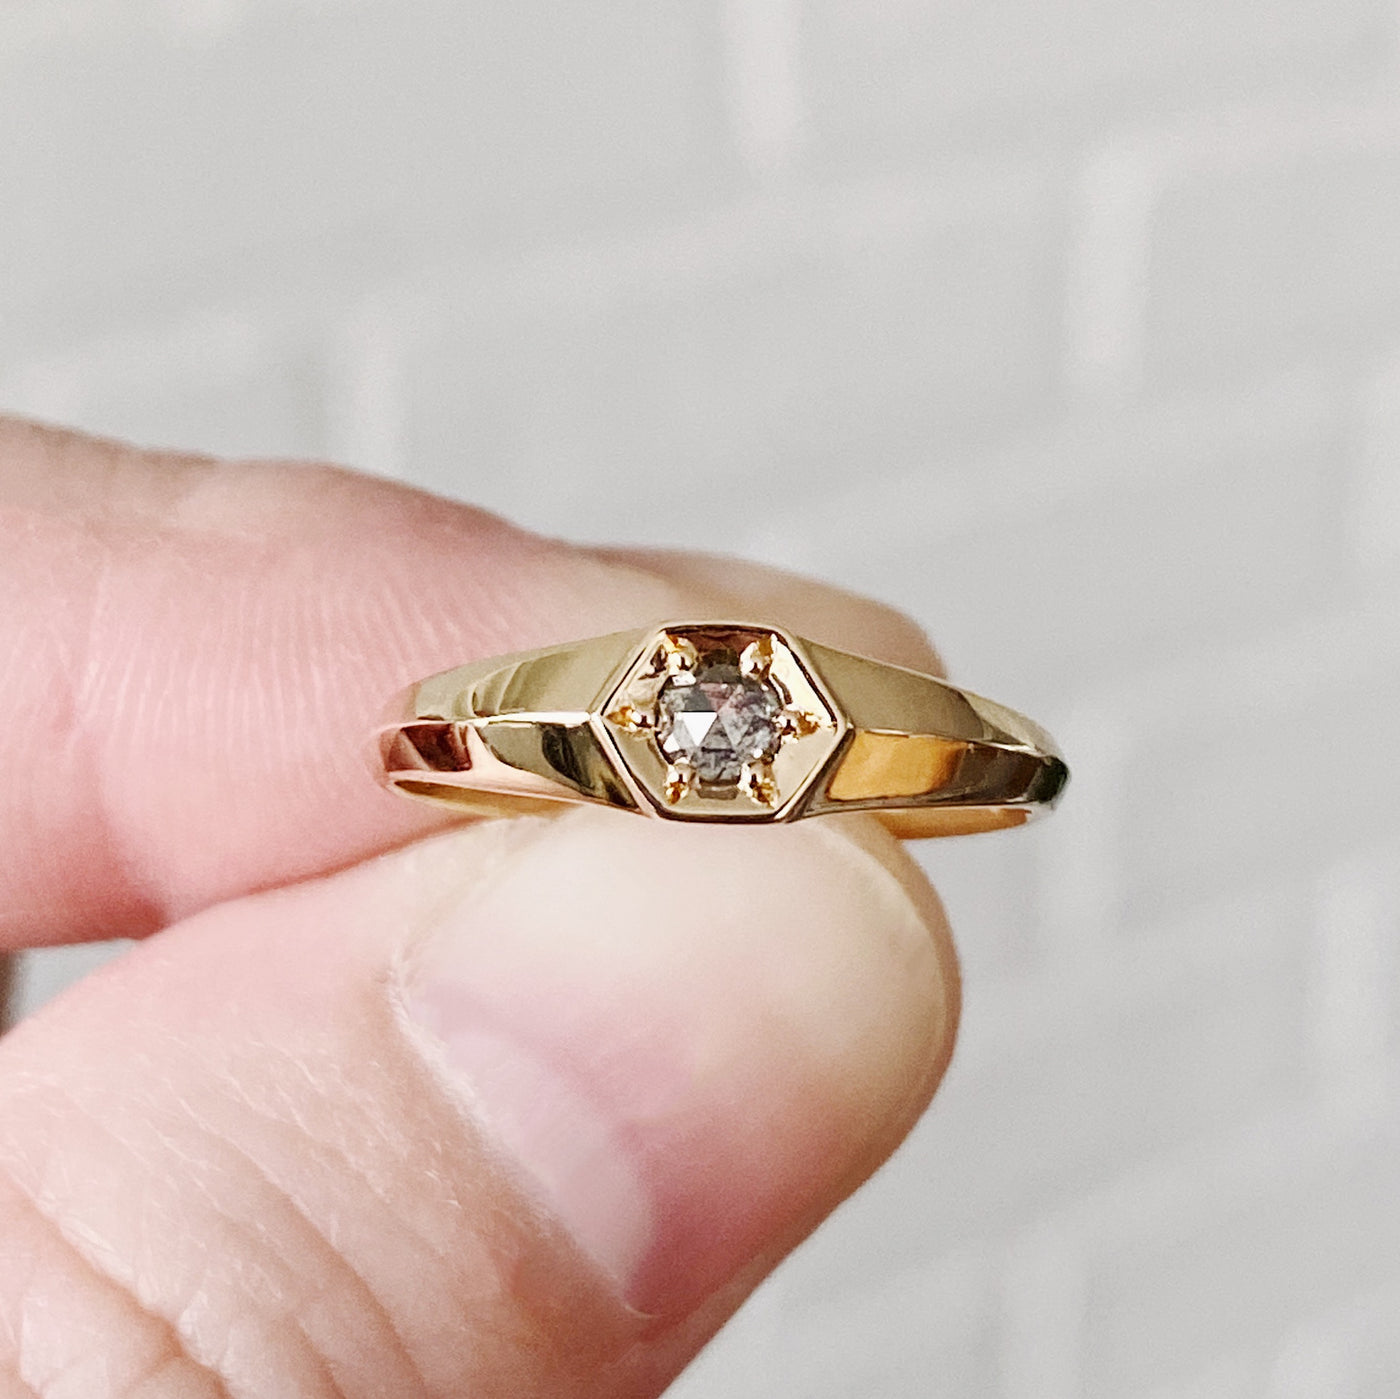 Yellow gold signet ring with bead set rose cut salt and pepper diamond held between two fingers